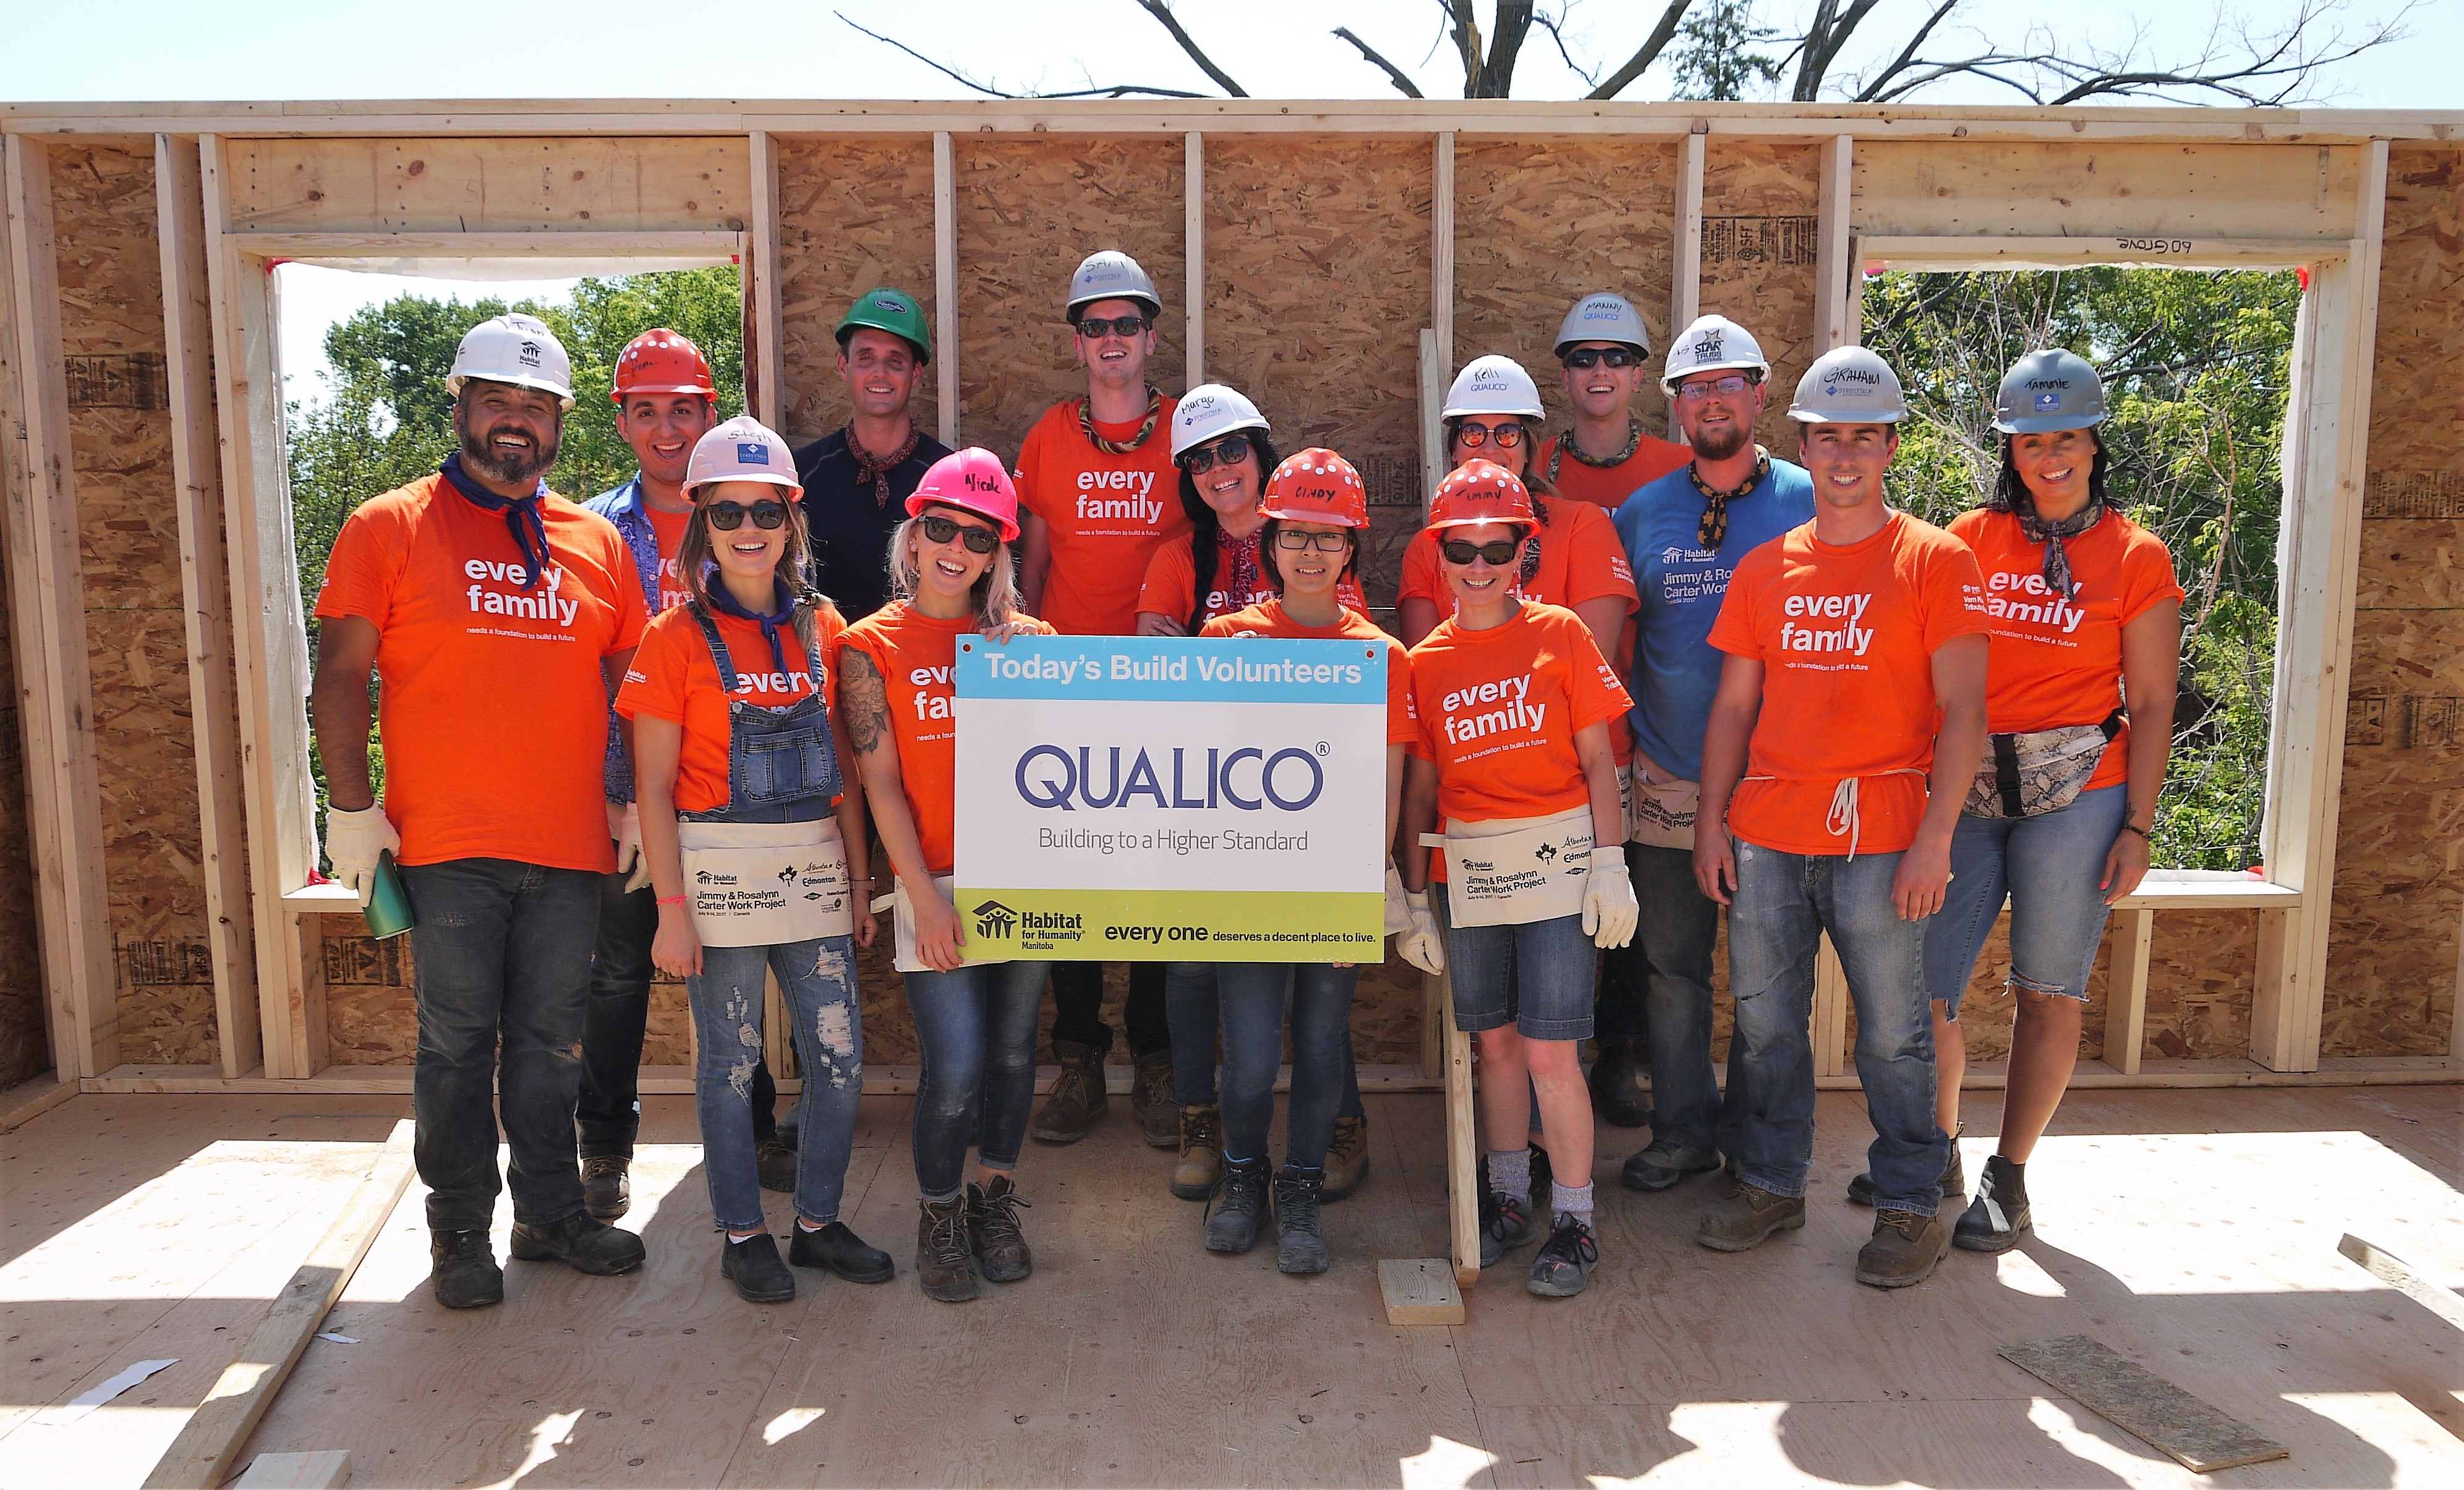 The Qualico Winnipeg Team stands in a new build that they helped put together for the annual volunteer day